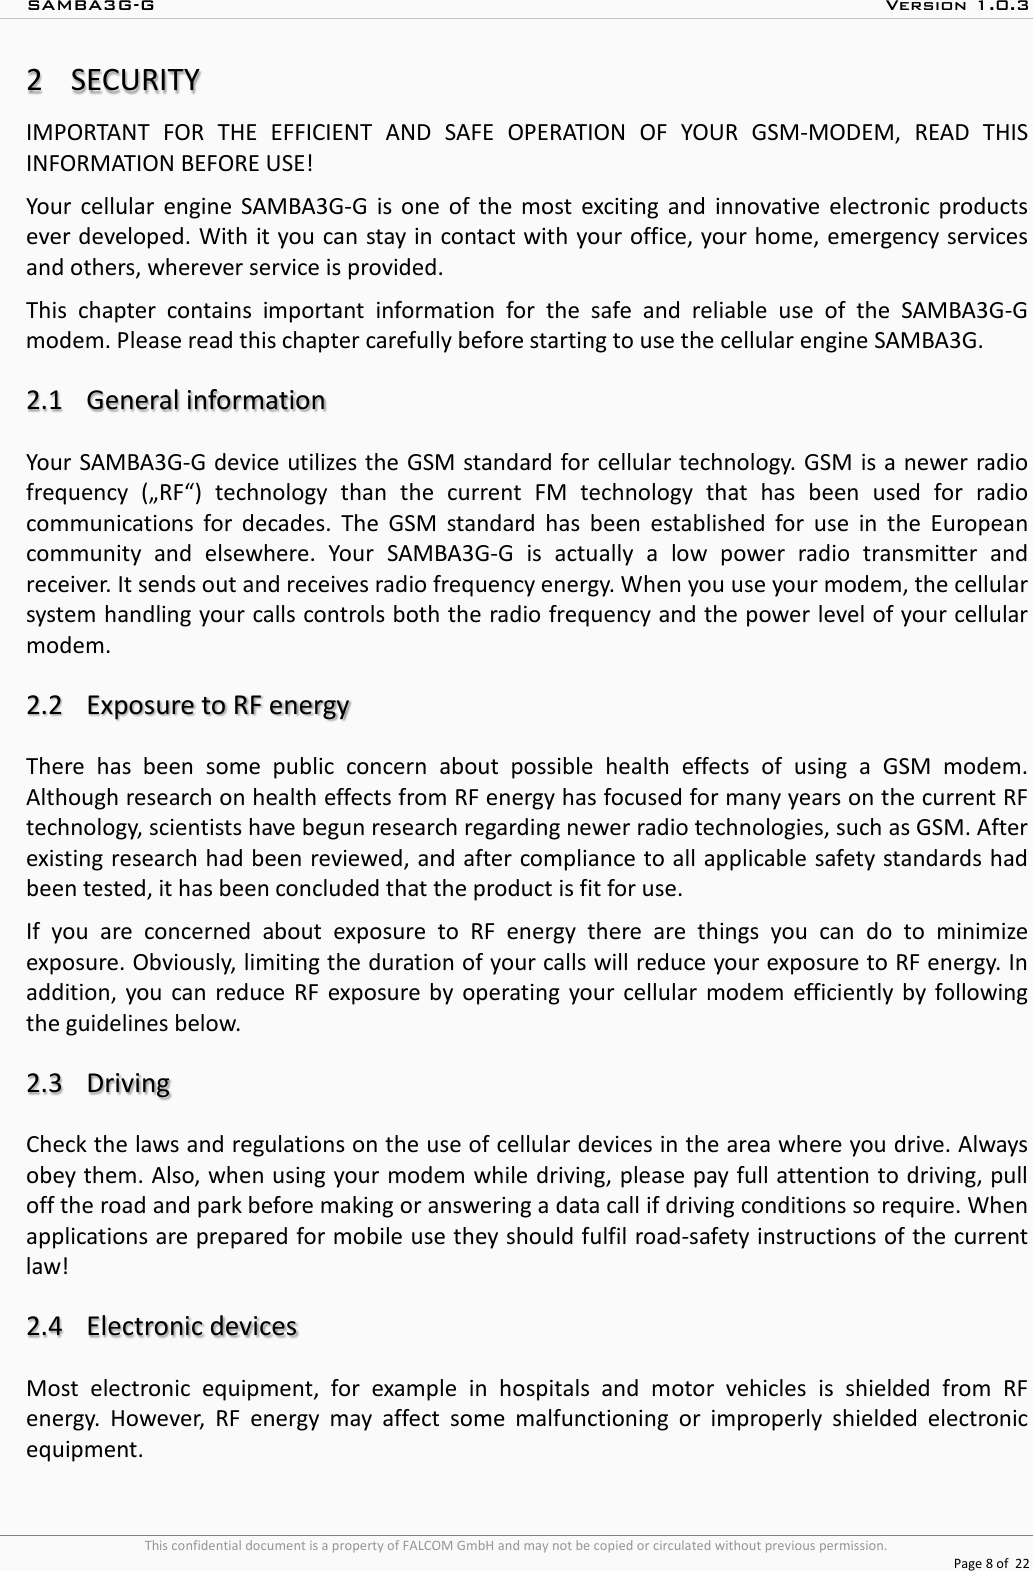 SAMBA3G-G  Version 1.0.3   This confidential document is a property of FALCOM GmbH and may not be copied or circulated without previous permission.  Page 8 of  22  2SECURITY IMPORTANT FOR THE EFFICIENT AND SAFE OPERATION OF YOUR GSM-MODEM, READ THIS INFORMATION BEFORE USE! Your cellular engine SAMBA3G-G  is one of the most exciting and innovative electronic products ever developed. With it you can stay in contact with your office, your home, emergency services and others, wherever service is provided. This chapter contains important information for the safe and reliable use of the SAMBA3G-G modem. Please read this chapter carefully before starting to use the cellular engine SAMBA3G.  2.1 General information Your  SAMBA3G-G device utilizes the GSM standard for cellular technology. GSM is a newer radio frequency („RF“) technology than the current FM technology that has been used for radio communications for decades. The GSM standard has been established for use in the European community and elsewhere. Your SAMBA3G-G  is actually a low power radio transmitter and receiver. It sends out and receives radio frequency energy. When you use your modem, the cellular system handling your calls controls both the radio frequency and the power level of your cellular modem.  2.2 Exposure to RF energy There has been some public concern about possible health effects of using a GSM modem. Although research on health effects from RF energy has focused for many years on the current RF technology, scientists have begun research regarding newer radio technologies, such as GSM. After existing research had been reviewed, and after compliance to all applicable safety standards had been tested, it has been concluded that the product is fit for use. If you are concerned about exposure to RF energy there are things you can do to minimize exposure. Obviously, limiting the duration of your calls will reduce your exposure to RF energy. In addition, you can reduce RF exposure by operating your cellular modem efficiently by following the guidelines below.  2.3 Driving Check the laws and regulations on the use of cellular devices in the area where you drive. Always obey them. Also, when using your modem while driving, please pay full attention to driving, pull off the road and park before making or answering a data call if driving conditions so require. When applications are prepared for mobile use they should fulfil road-safety instructions of the current law!  2.4 Electronic devices Most electronic equipment, for example in hospitals and motor vehicles is shielded from RF energy. However, RF energy may affect some malfunctioning or improperly shielded electronic equipment. 